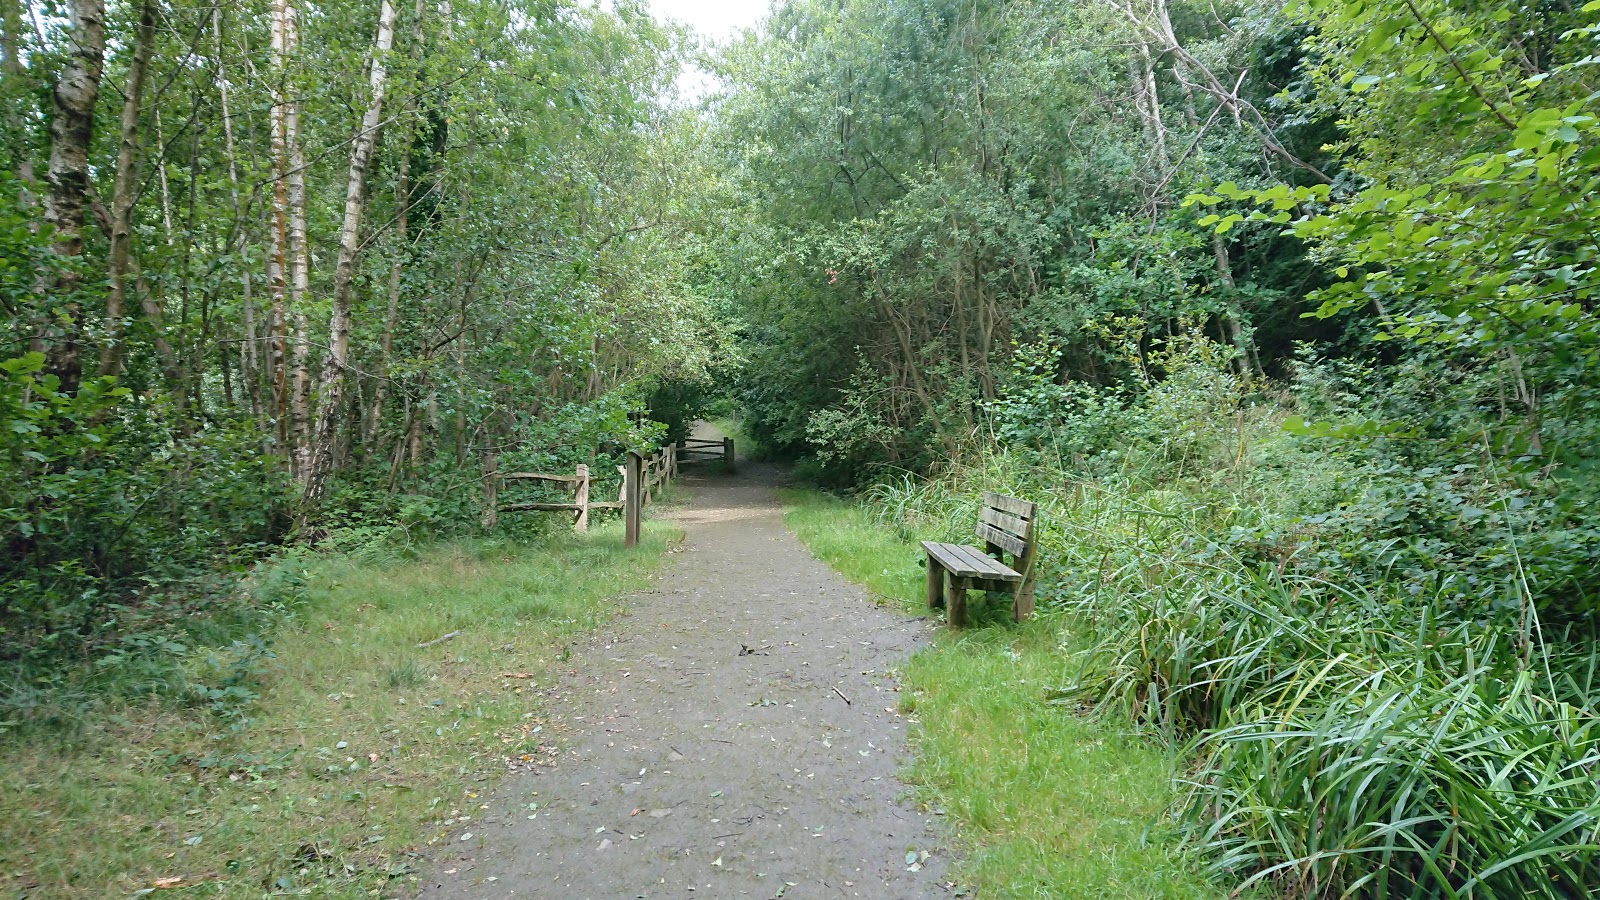 https://whatremovals.co.uk/wp-content/uploads/2022/02/Crowborough Country Park-300x169.jpeg